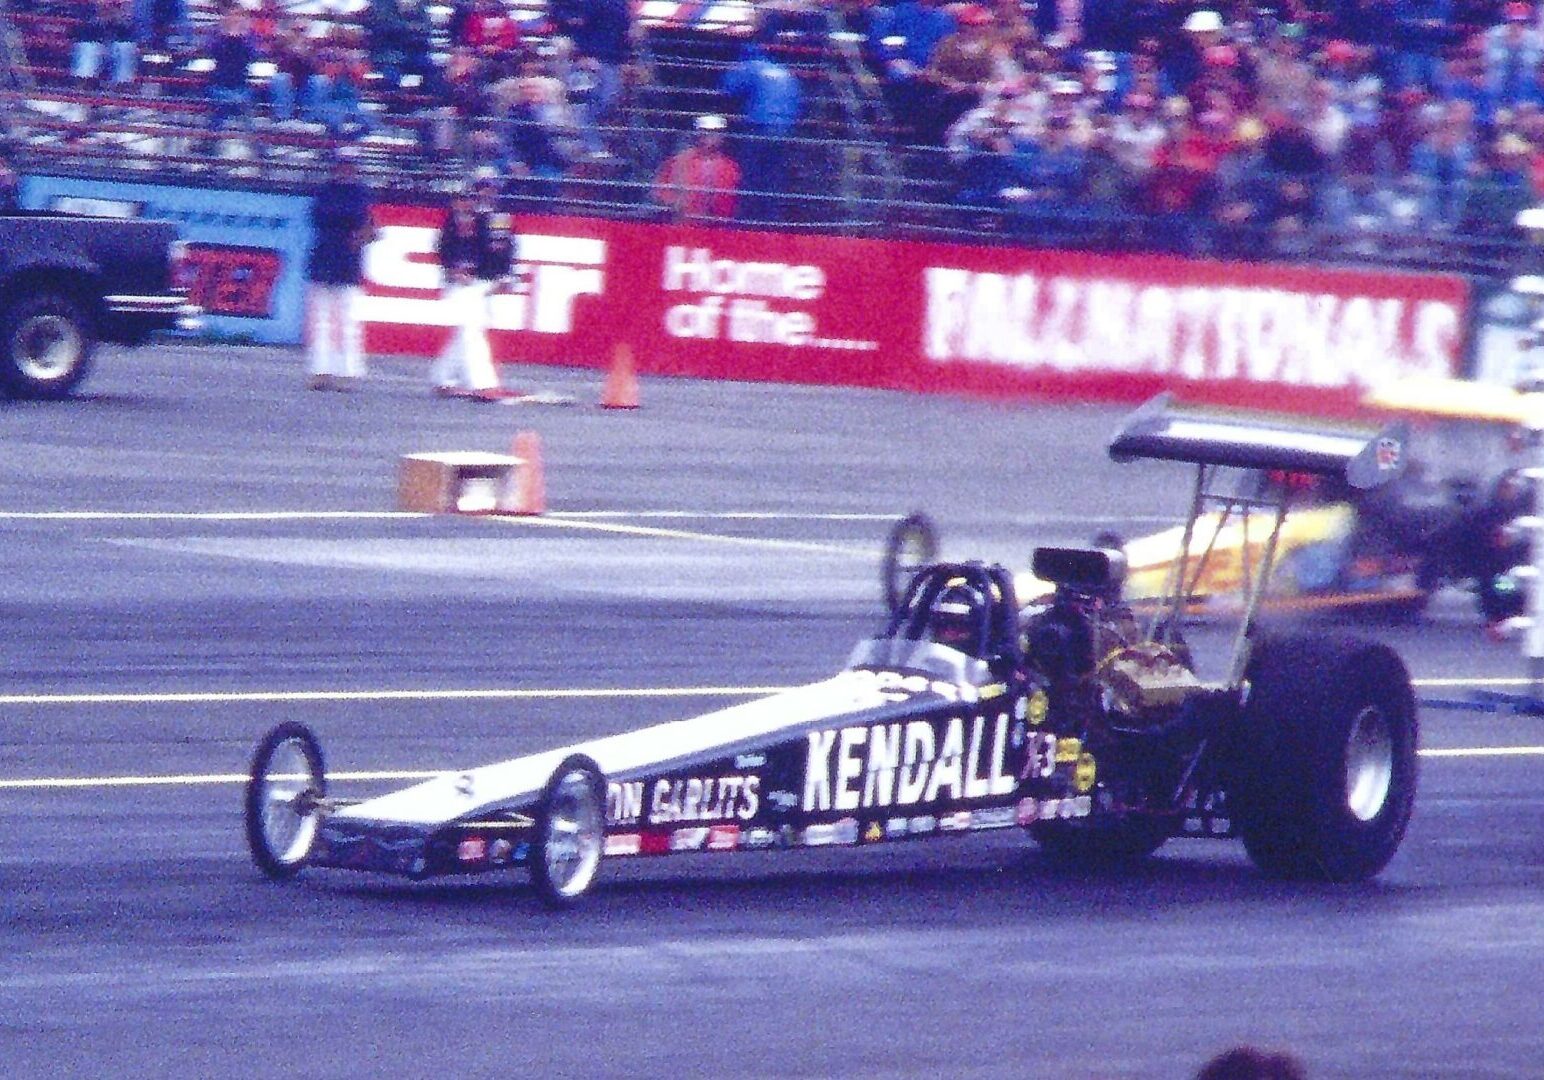 An attempt at ground effects – the body was built by Sikora Brothers of Cleveland, Ohio, the chassis by the late Lester Guillory Jr. of Baton Rouge, Louisiana. At 1700lbs the car was too heavy.  The experiment was not entirely successful; however, Don won the 1980 AHRA World Championship with “Godzilla”.  Swamp Rat 25 had a top speed of 251.39 MPH and a 5.75 second ET.